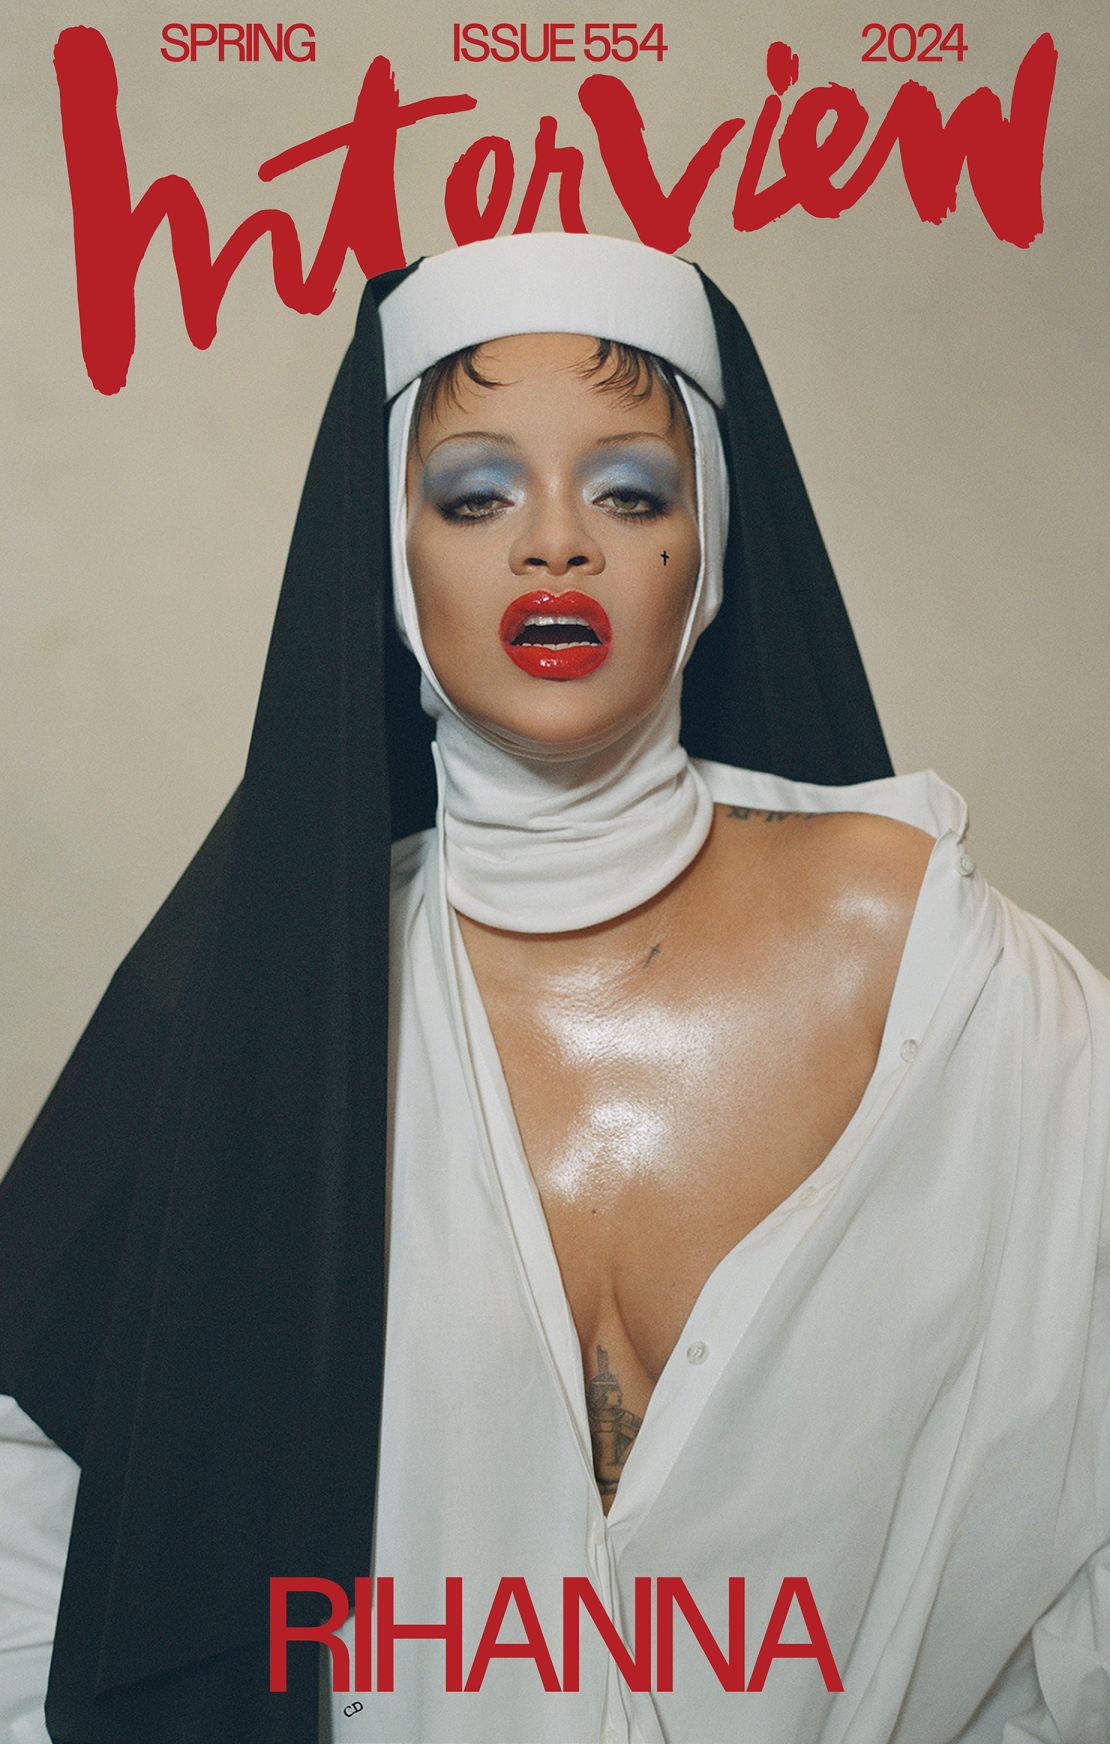 Rihanna fronted the cover of Interview magazine, photographed by Nadia Lee Cohen.